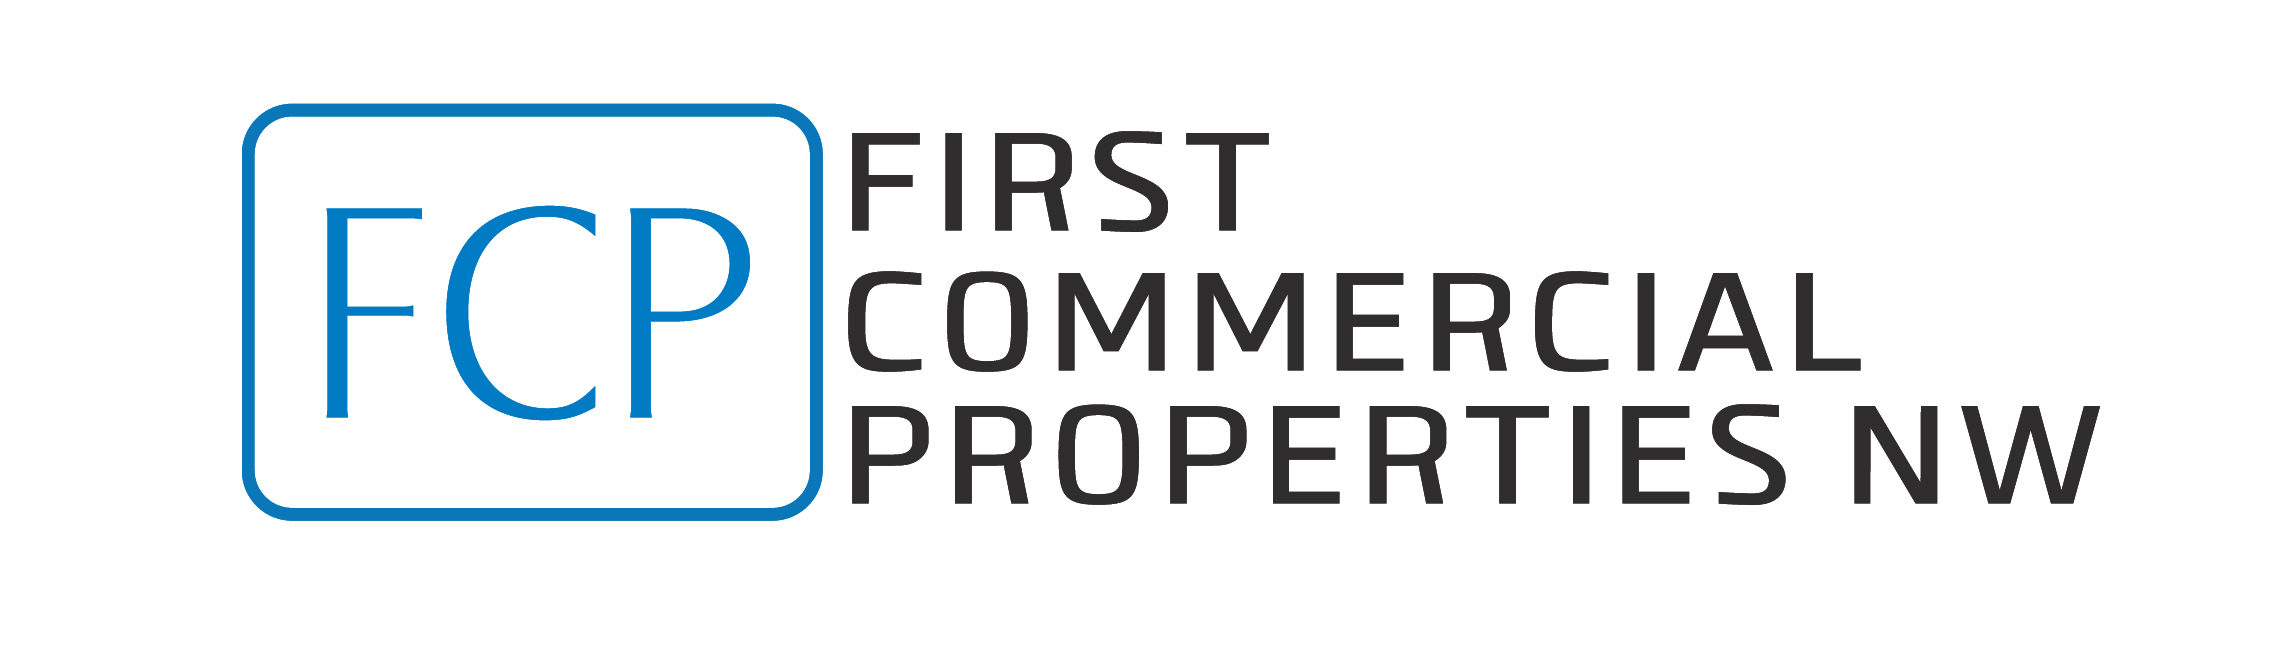 First Commercial Properties NW